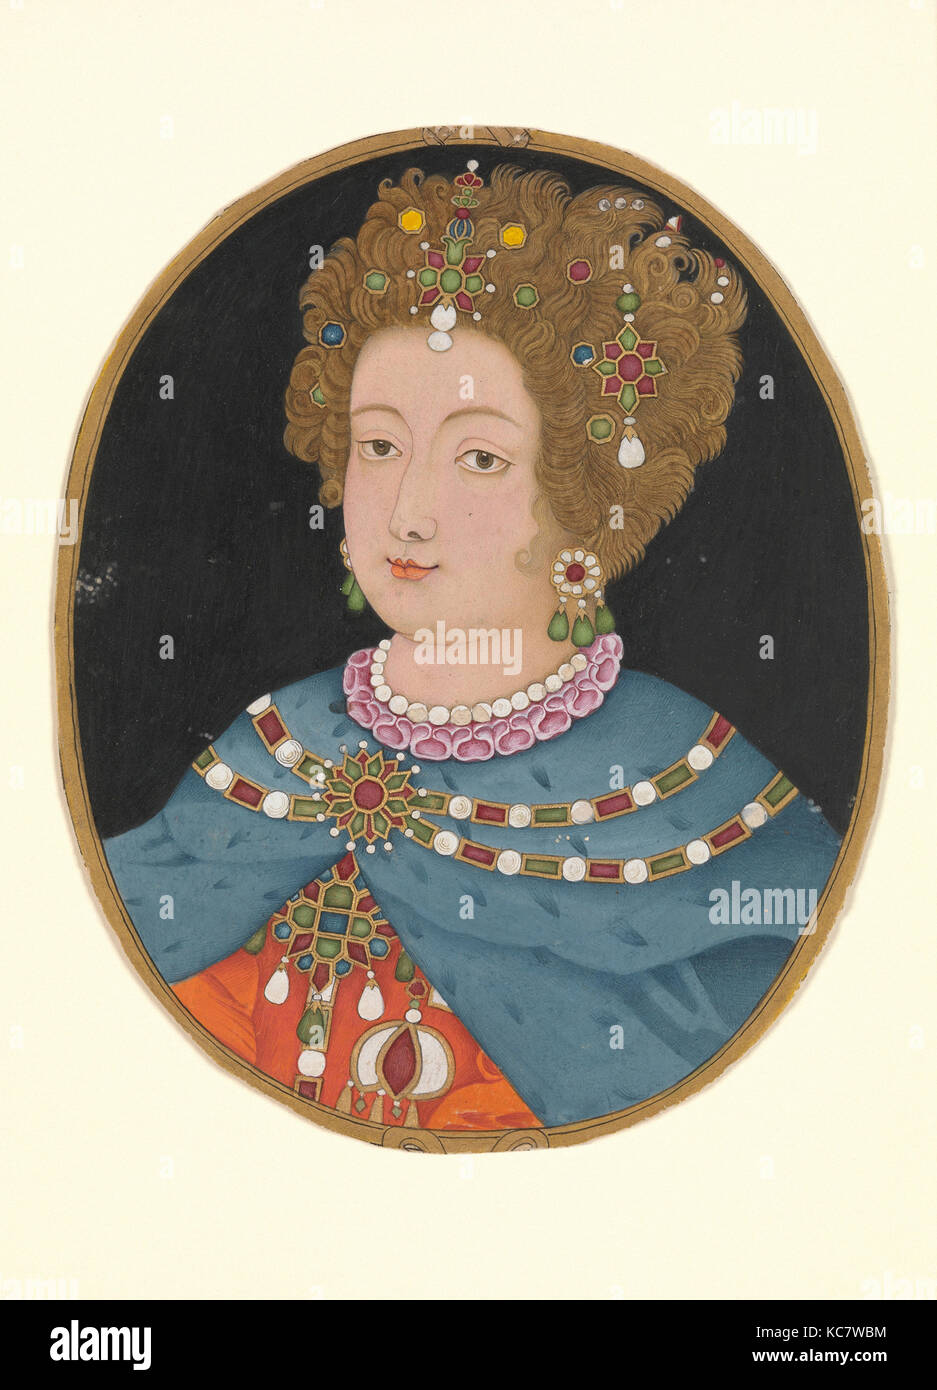 Lady in Elizabethan Costume, late 17th century, Country of Origin India, probably Lucknow, Opaque watercolor, gold, and silver Stock Photo